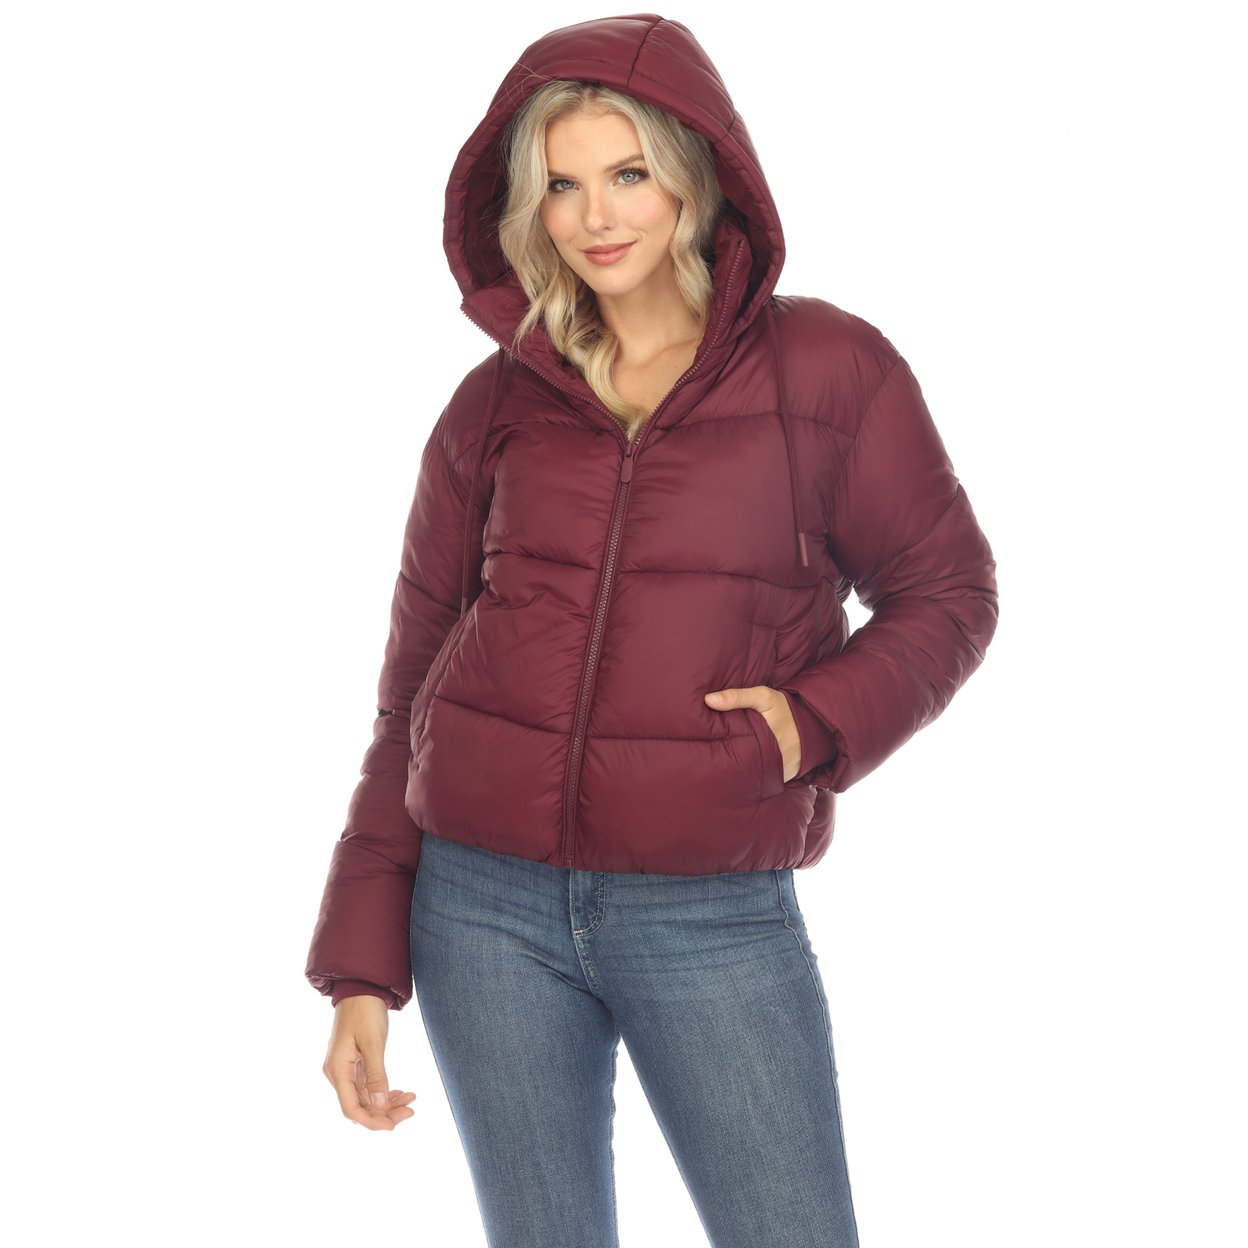 White Mark Women's Zip Hooded Puffer Jacket With Pockets - Burgundy, Large